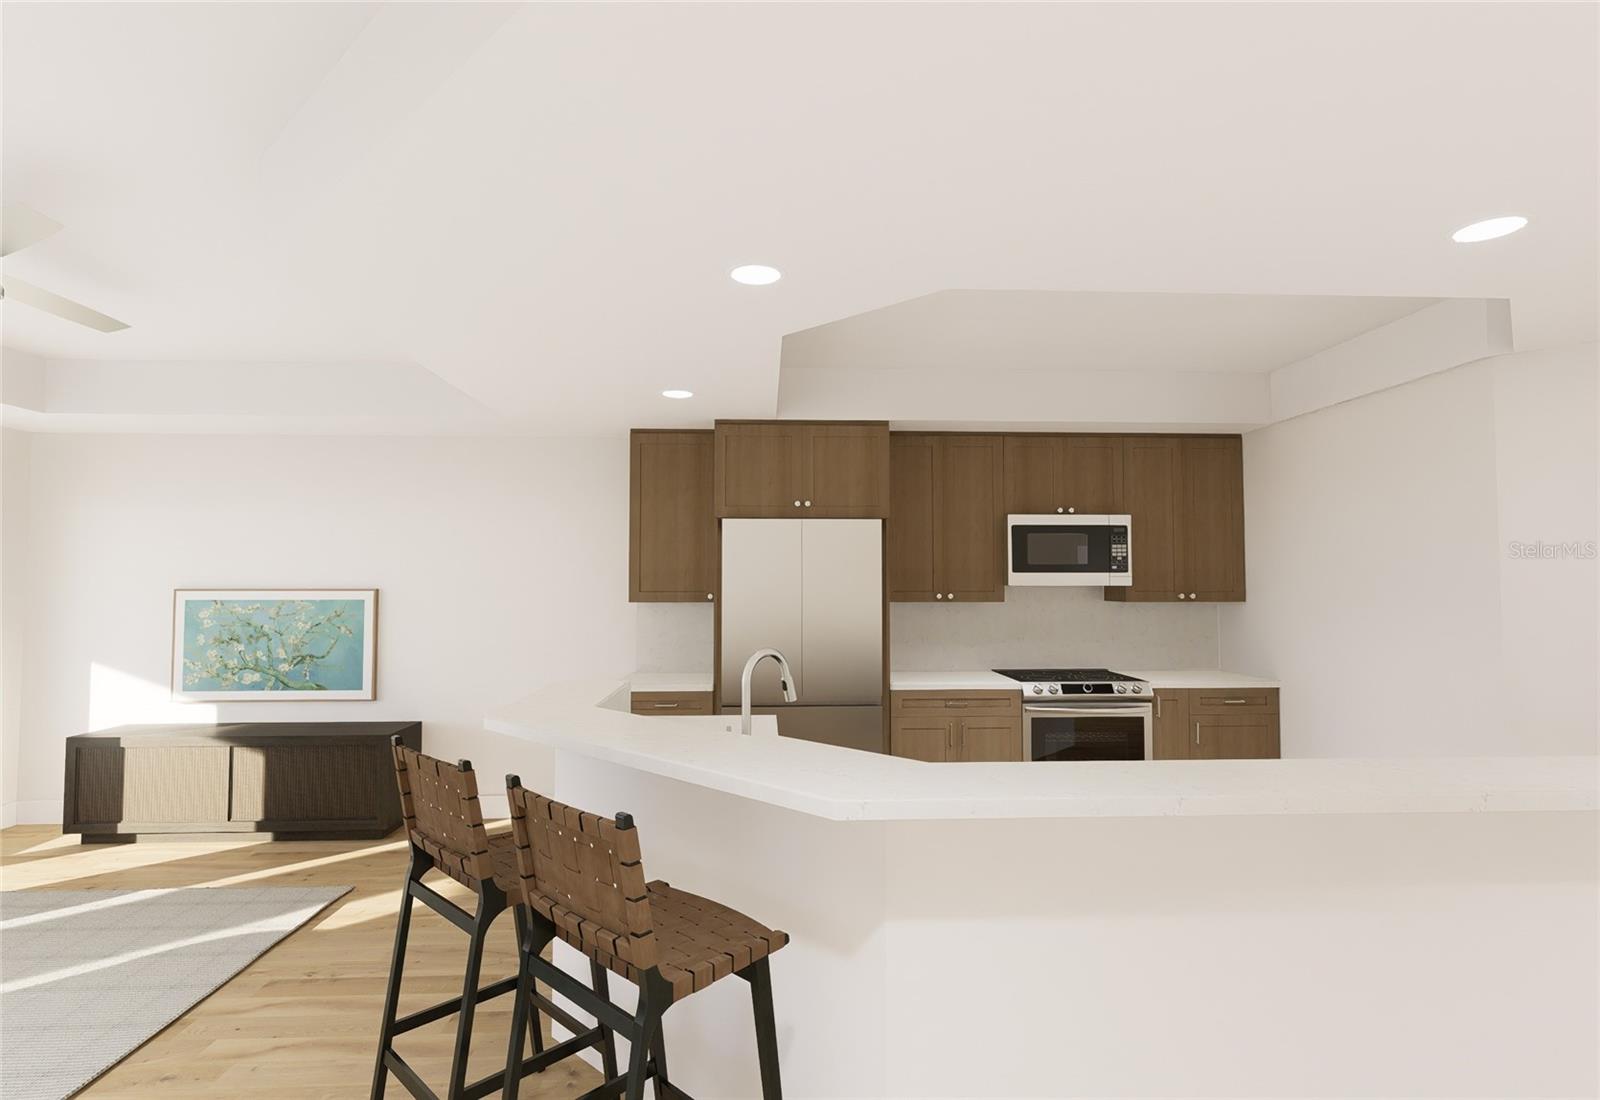 *Rendering Example**Unit does not come with physical ceiling fans, furniture, and washer/dryer appliances.